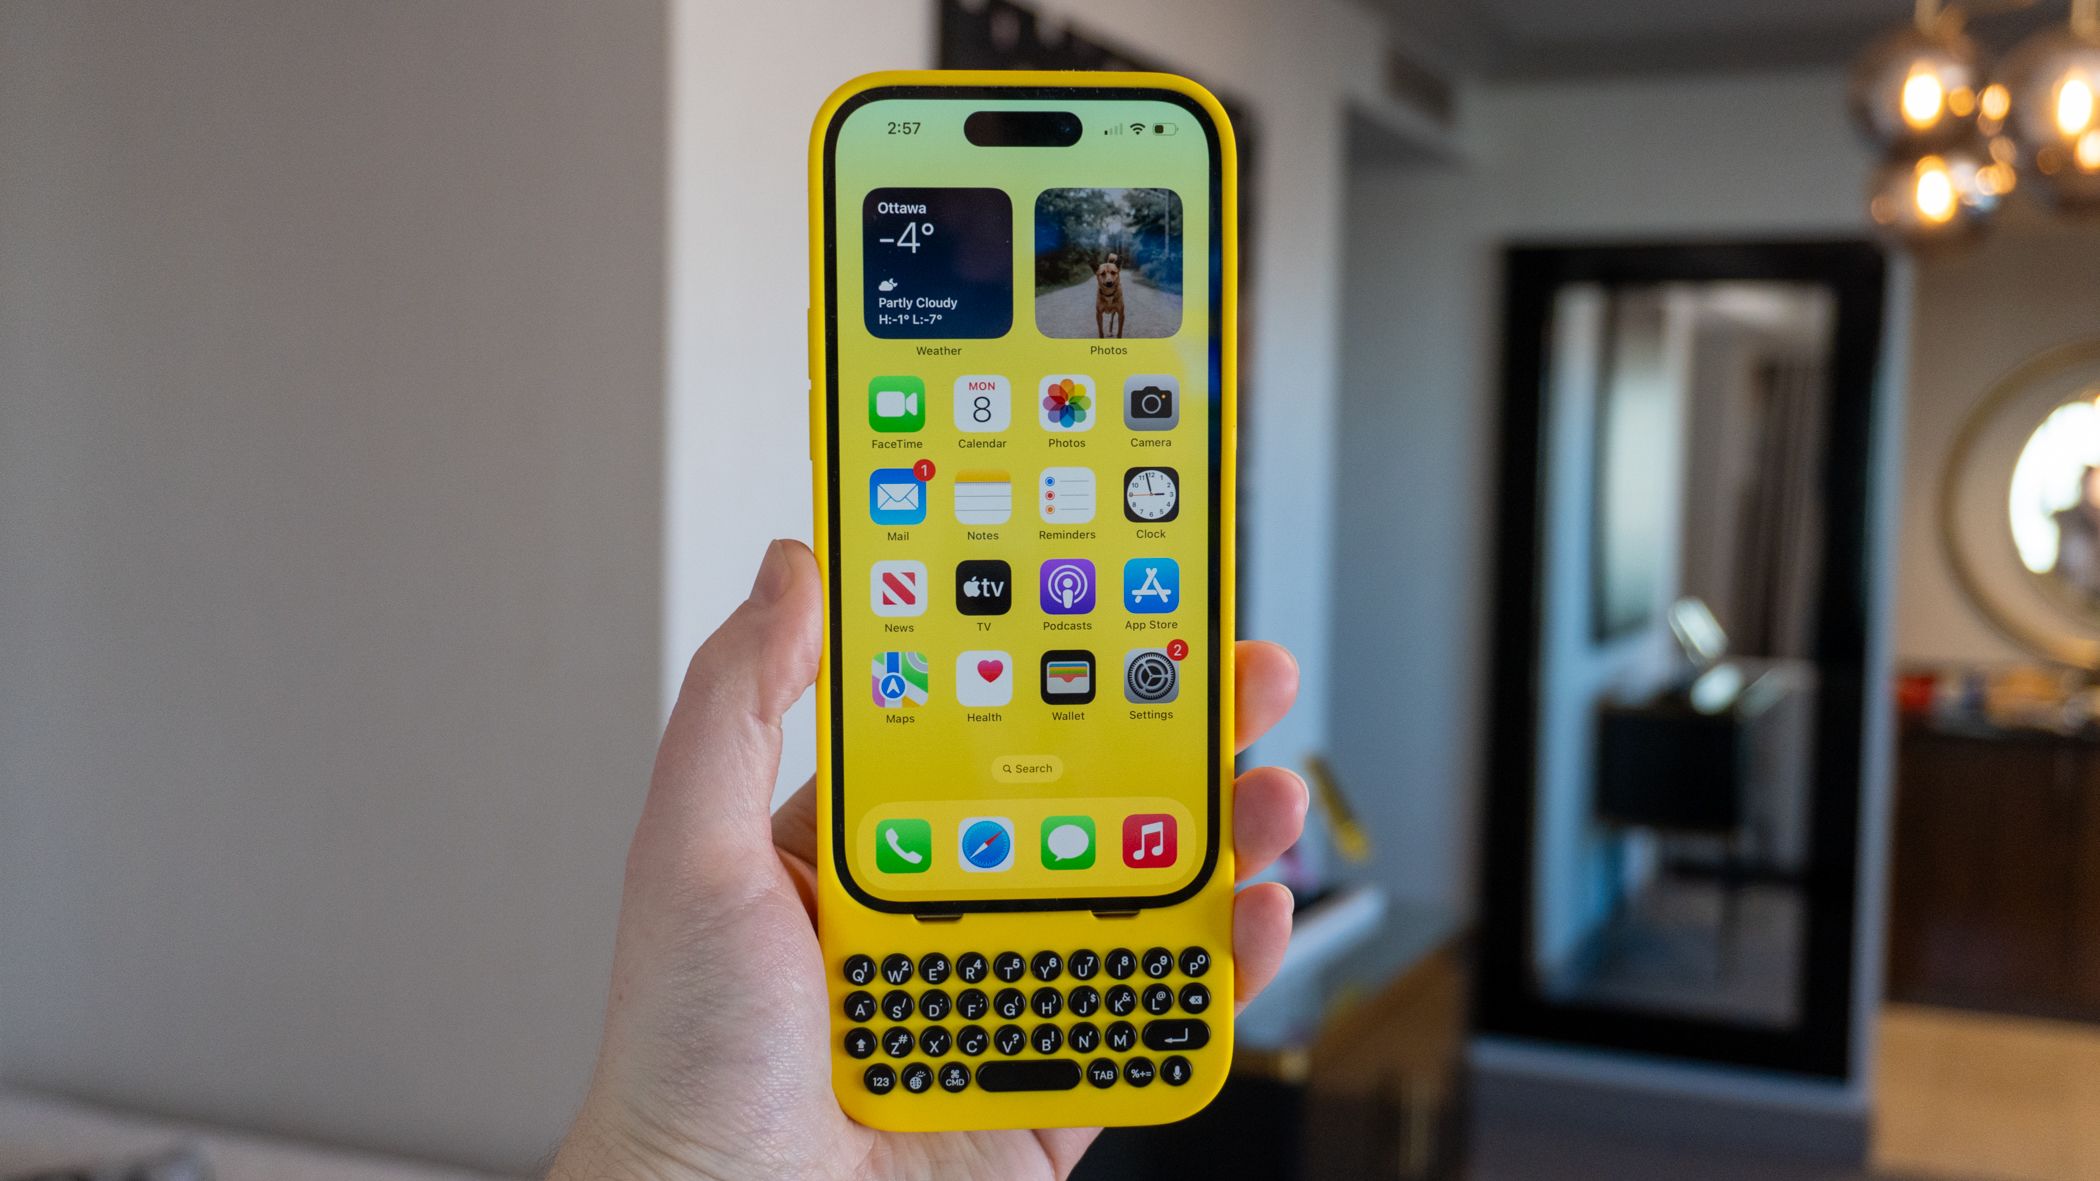 Clicks is a BlackBerry-style iPhone keyboard case designed for